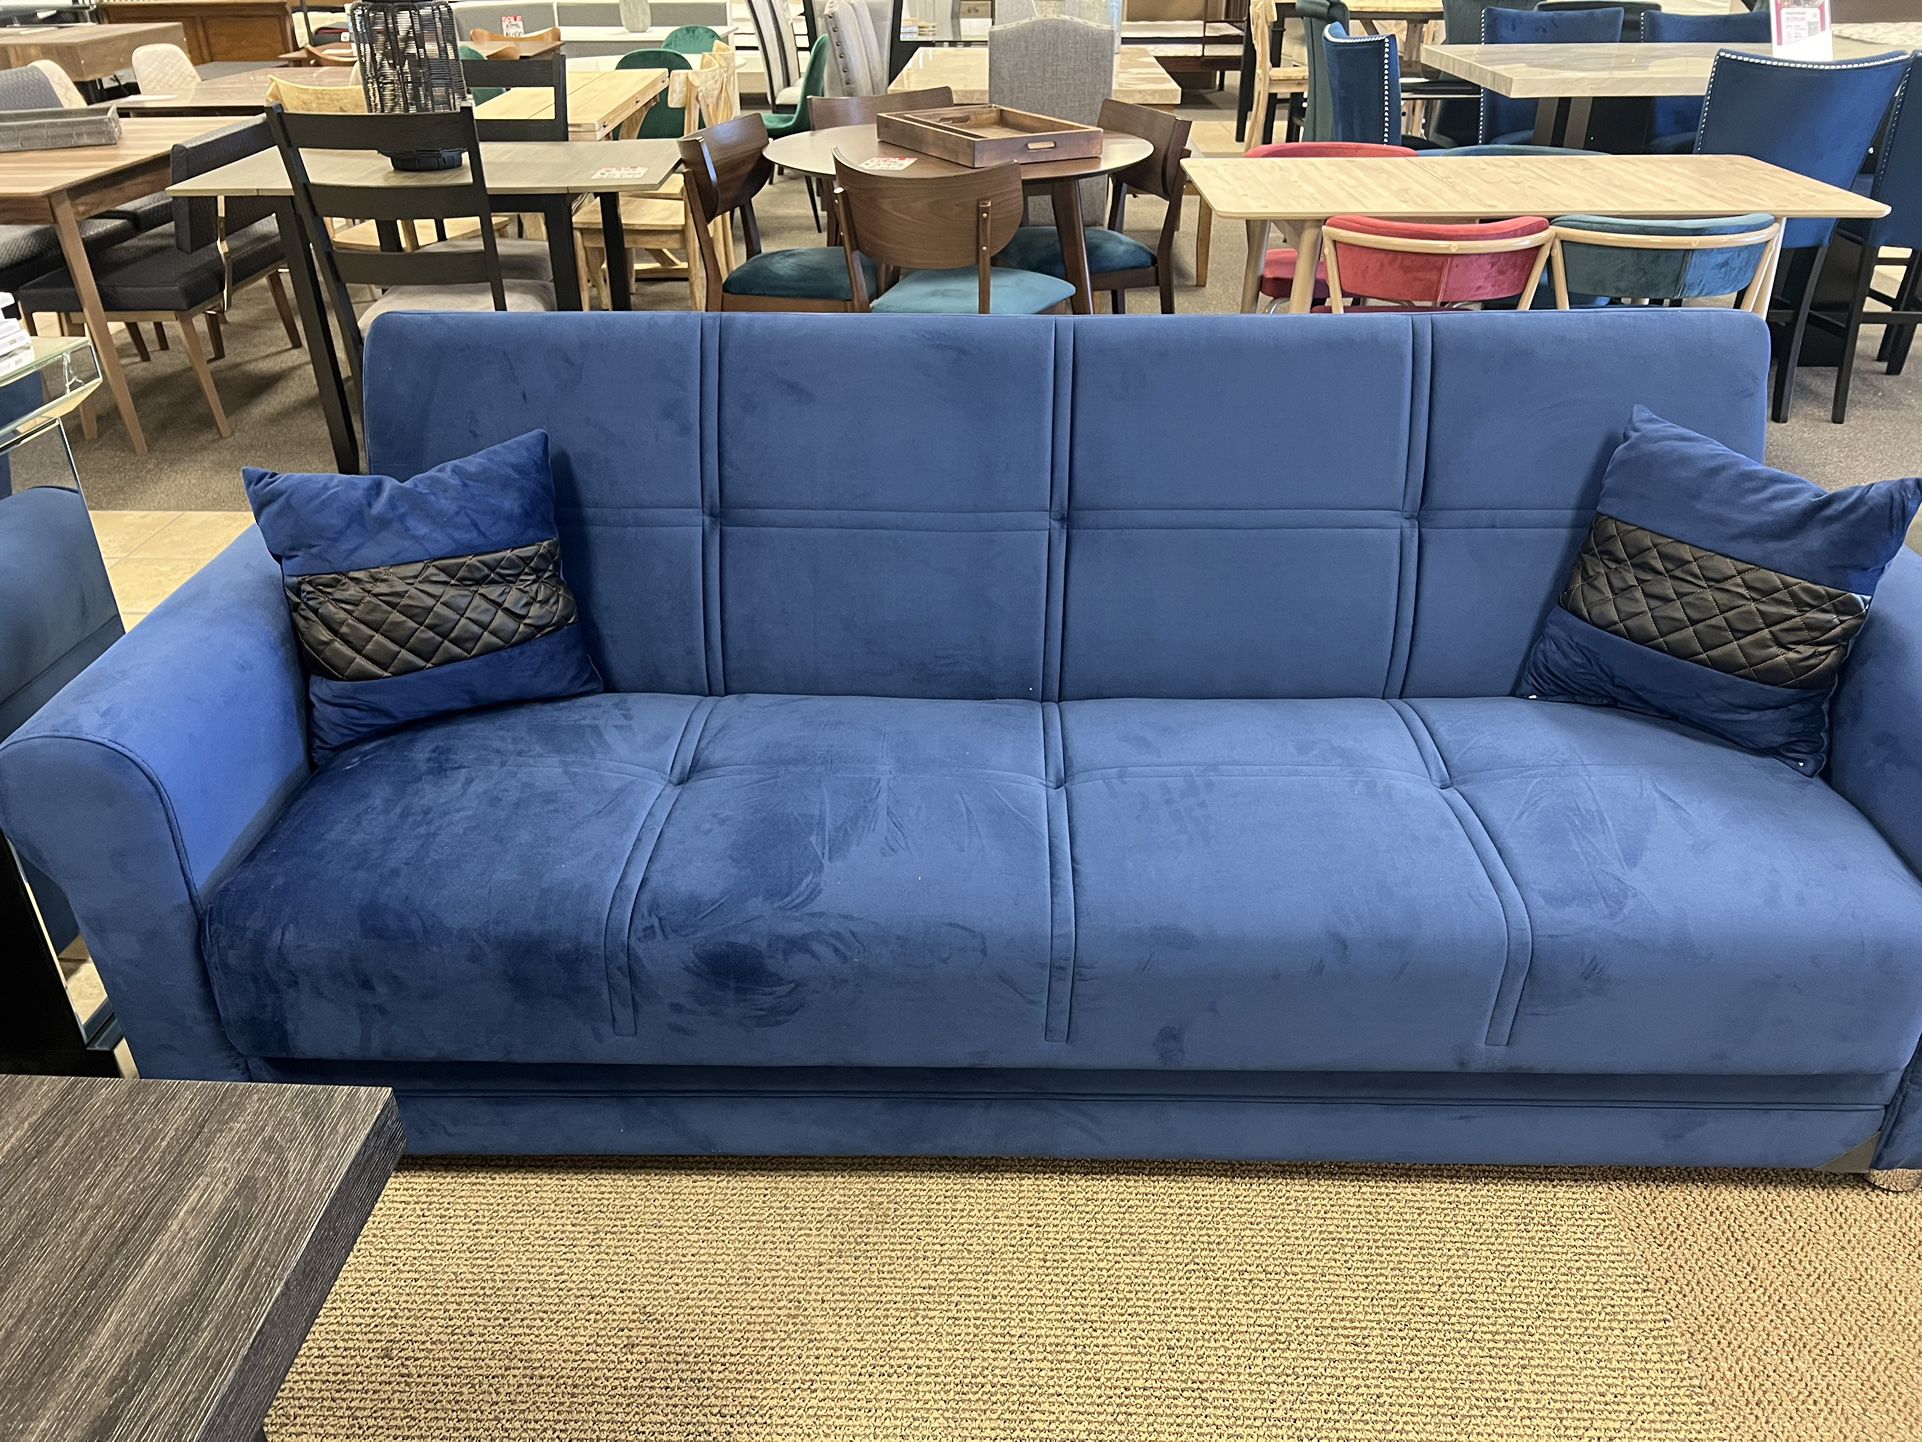 Convertable Blue Microfiber Sleeper Sofa W/ Storage Pillows Included